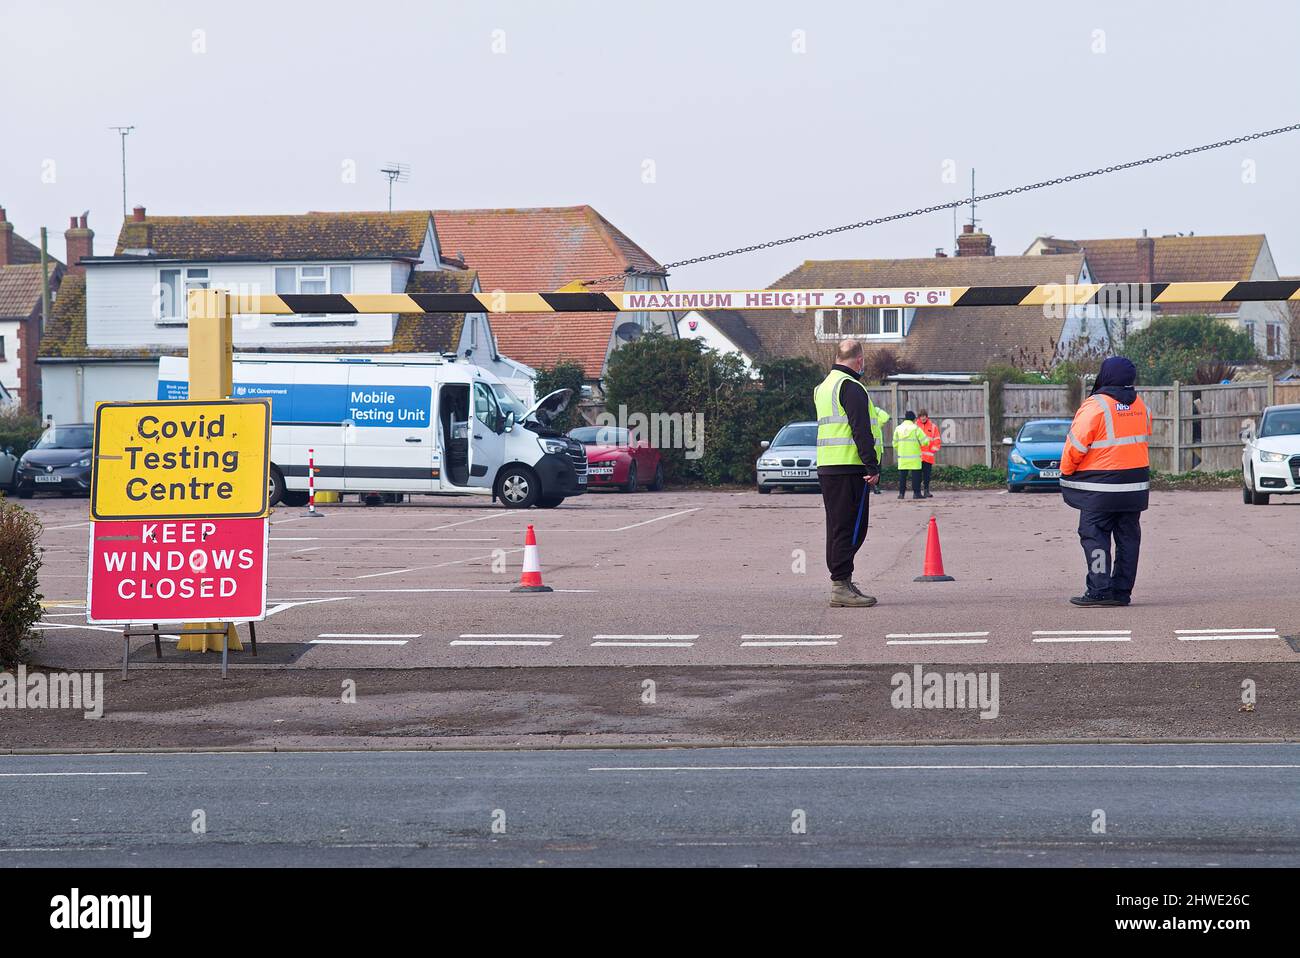 Mobile Covid Testing Centre in a public car park along the sea front at Clacton on Sea. Stock Photo